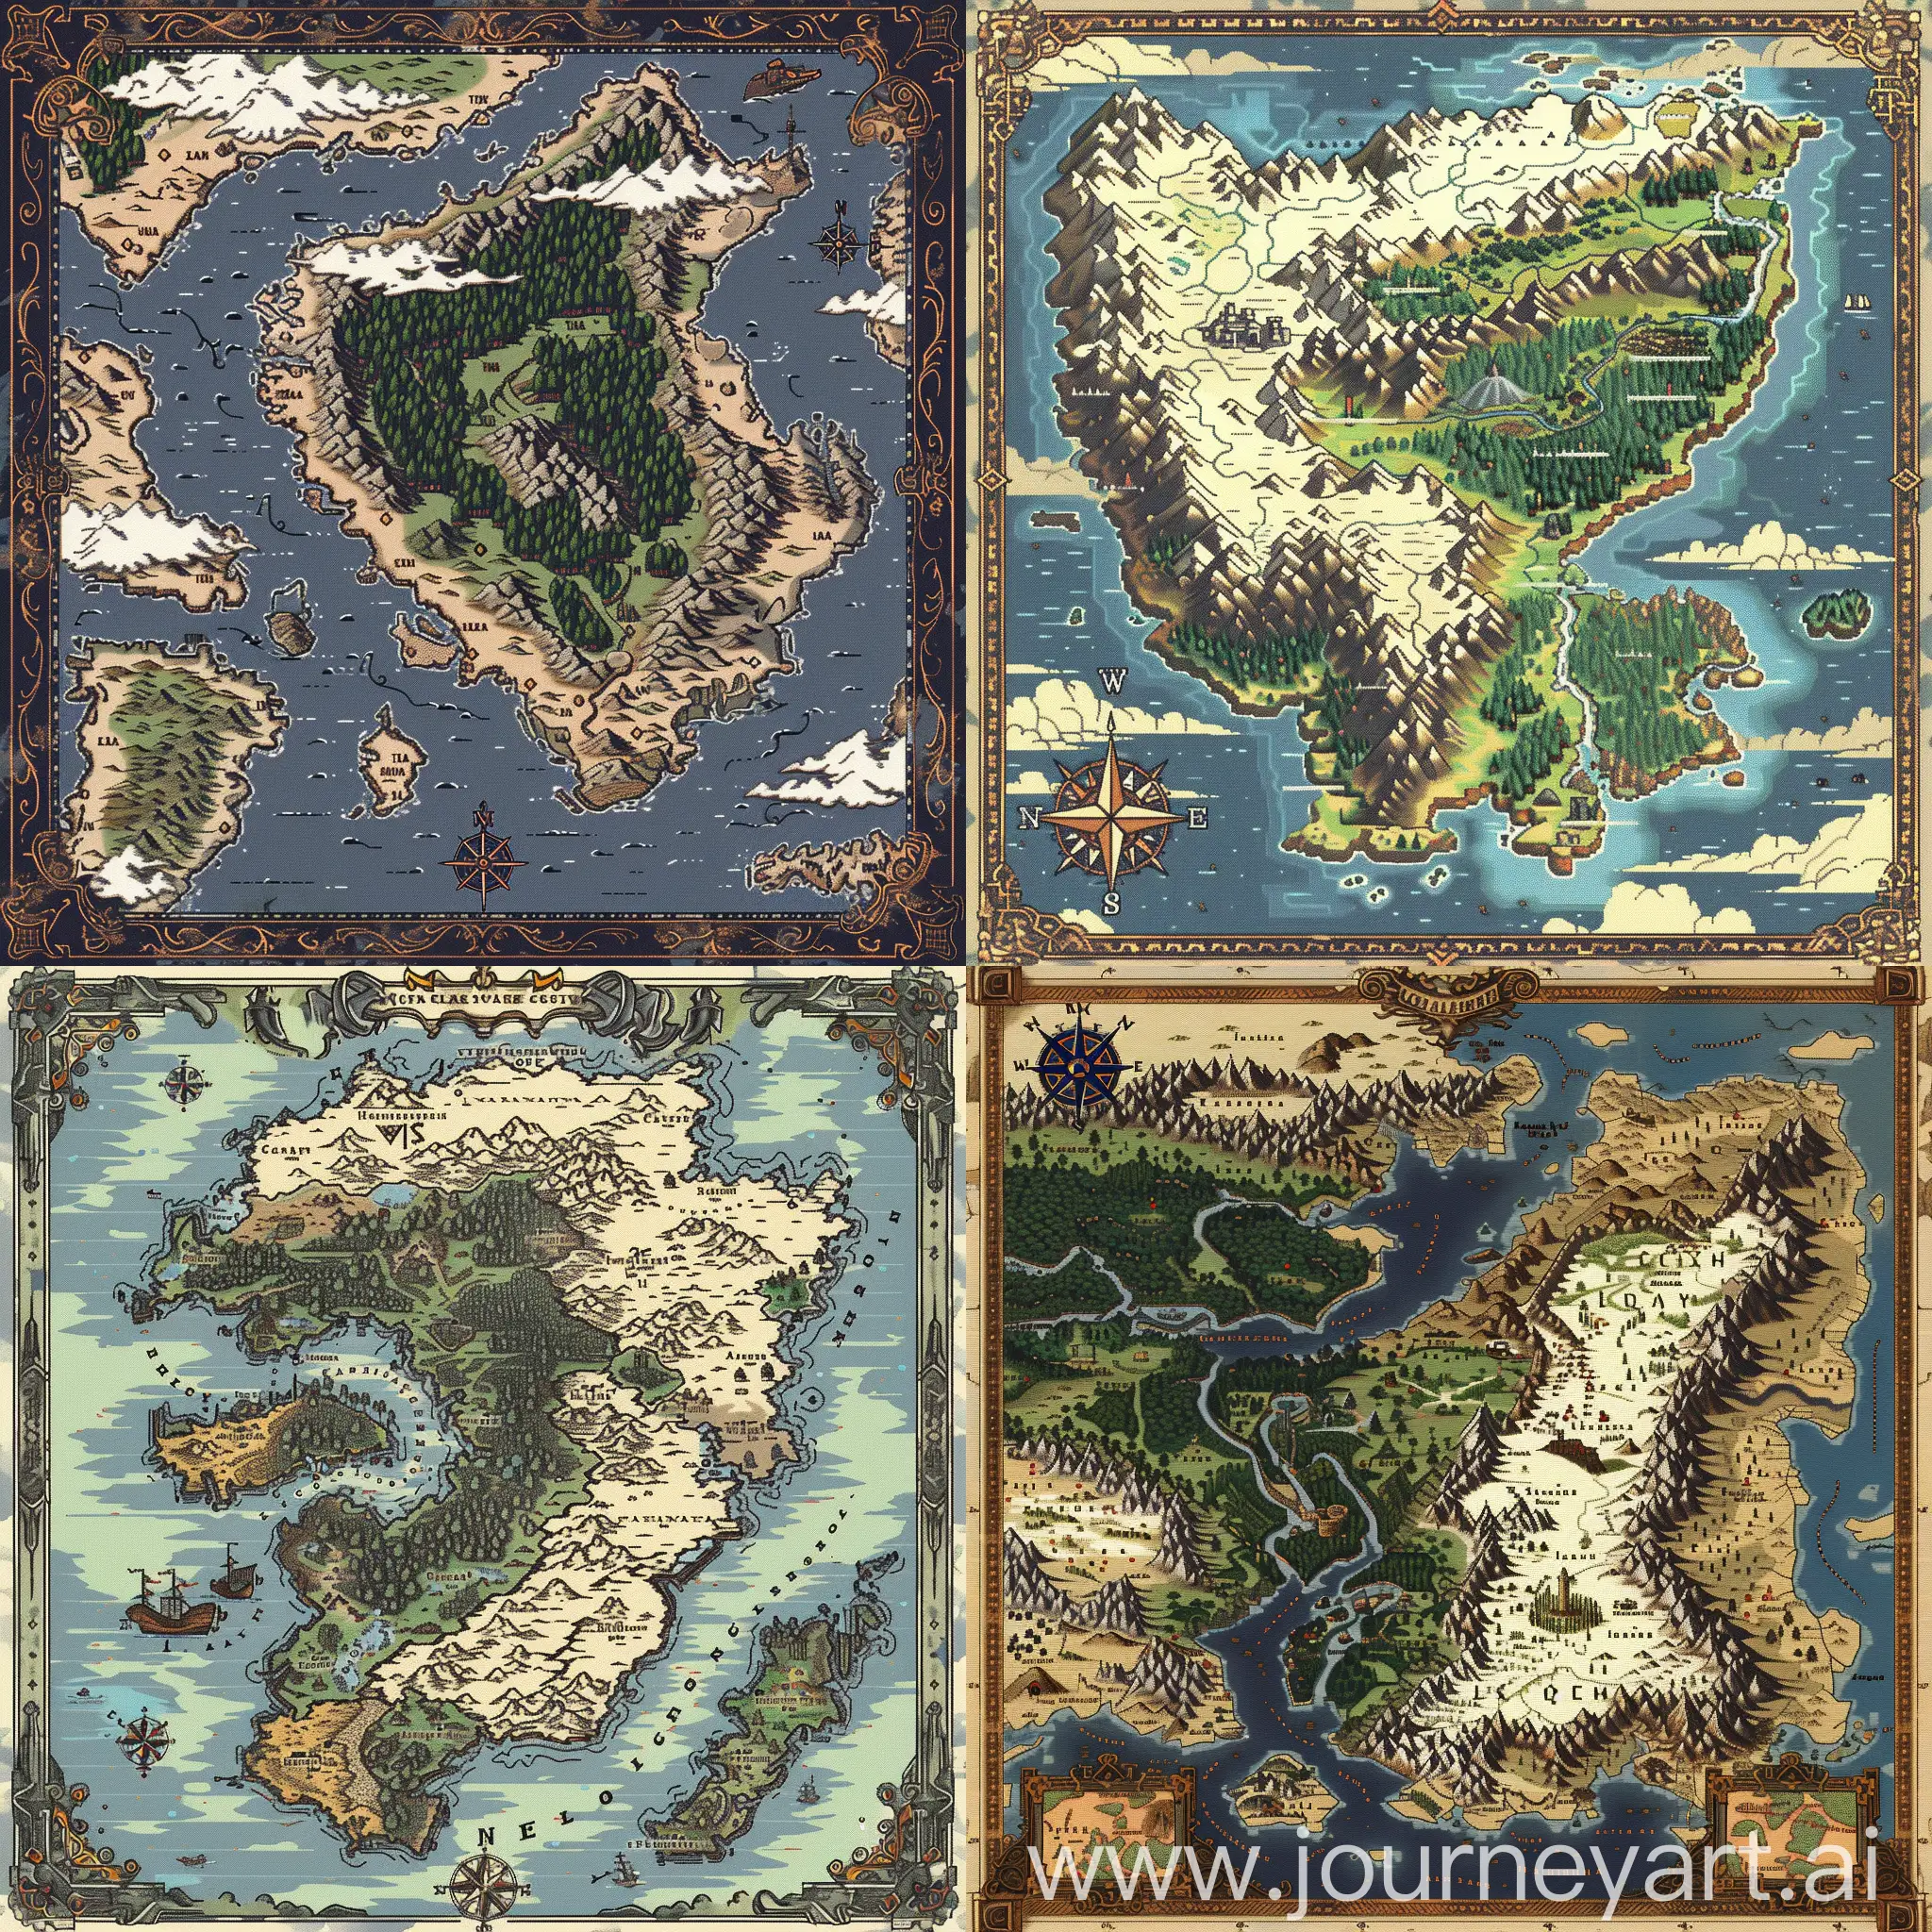 A highly detailed pixel art, middle ages, intricate world map of a large island continent. The map should feature varied terrain, including towering mountain ranges, vast forests, winding rivers, and sprawling coastlines. Include intricate border designs, compass rose, and a decorative title